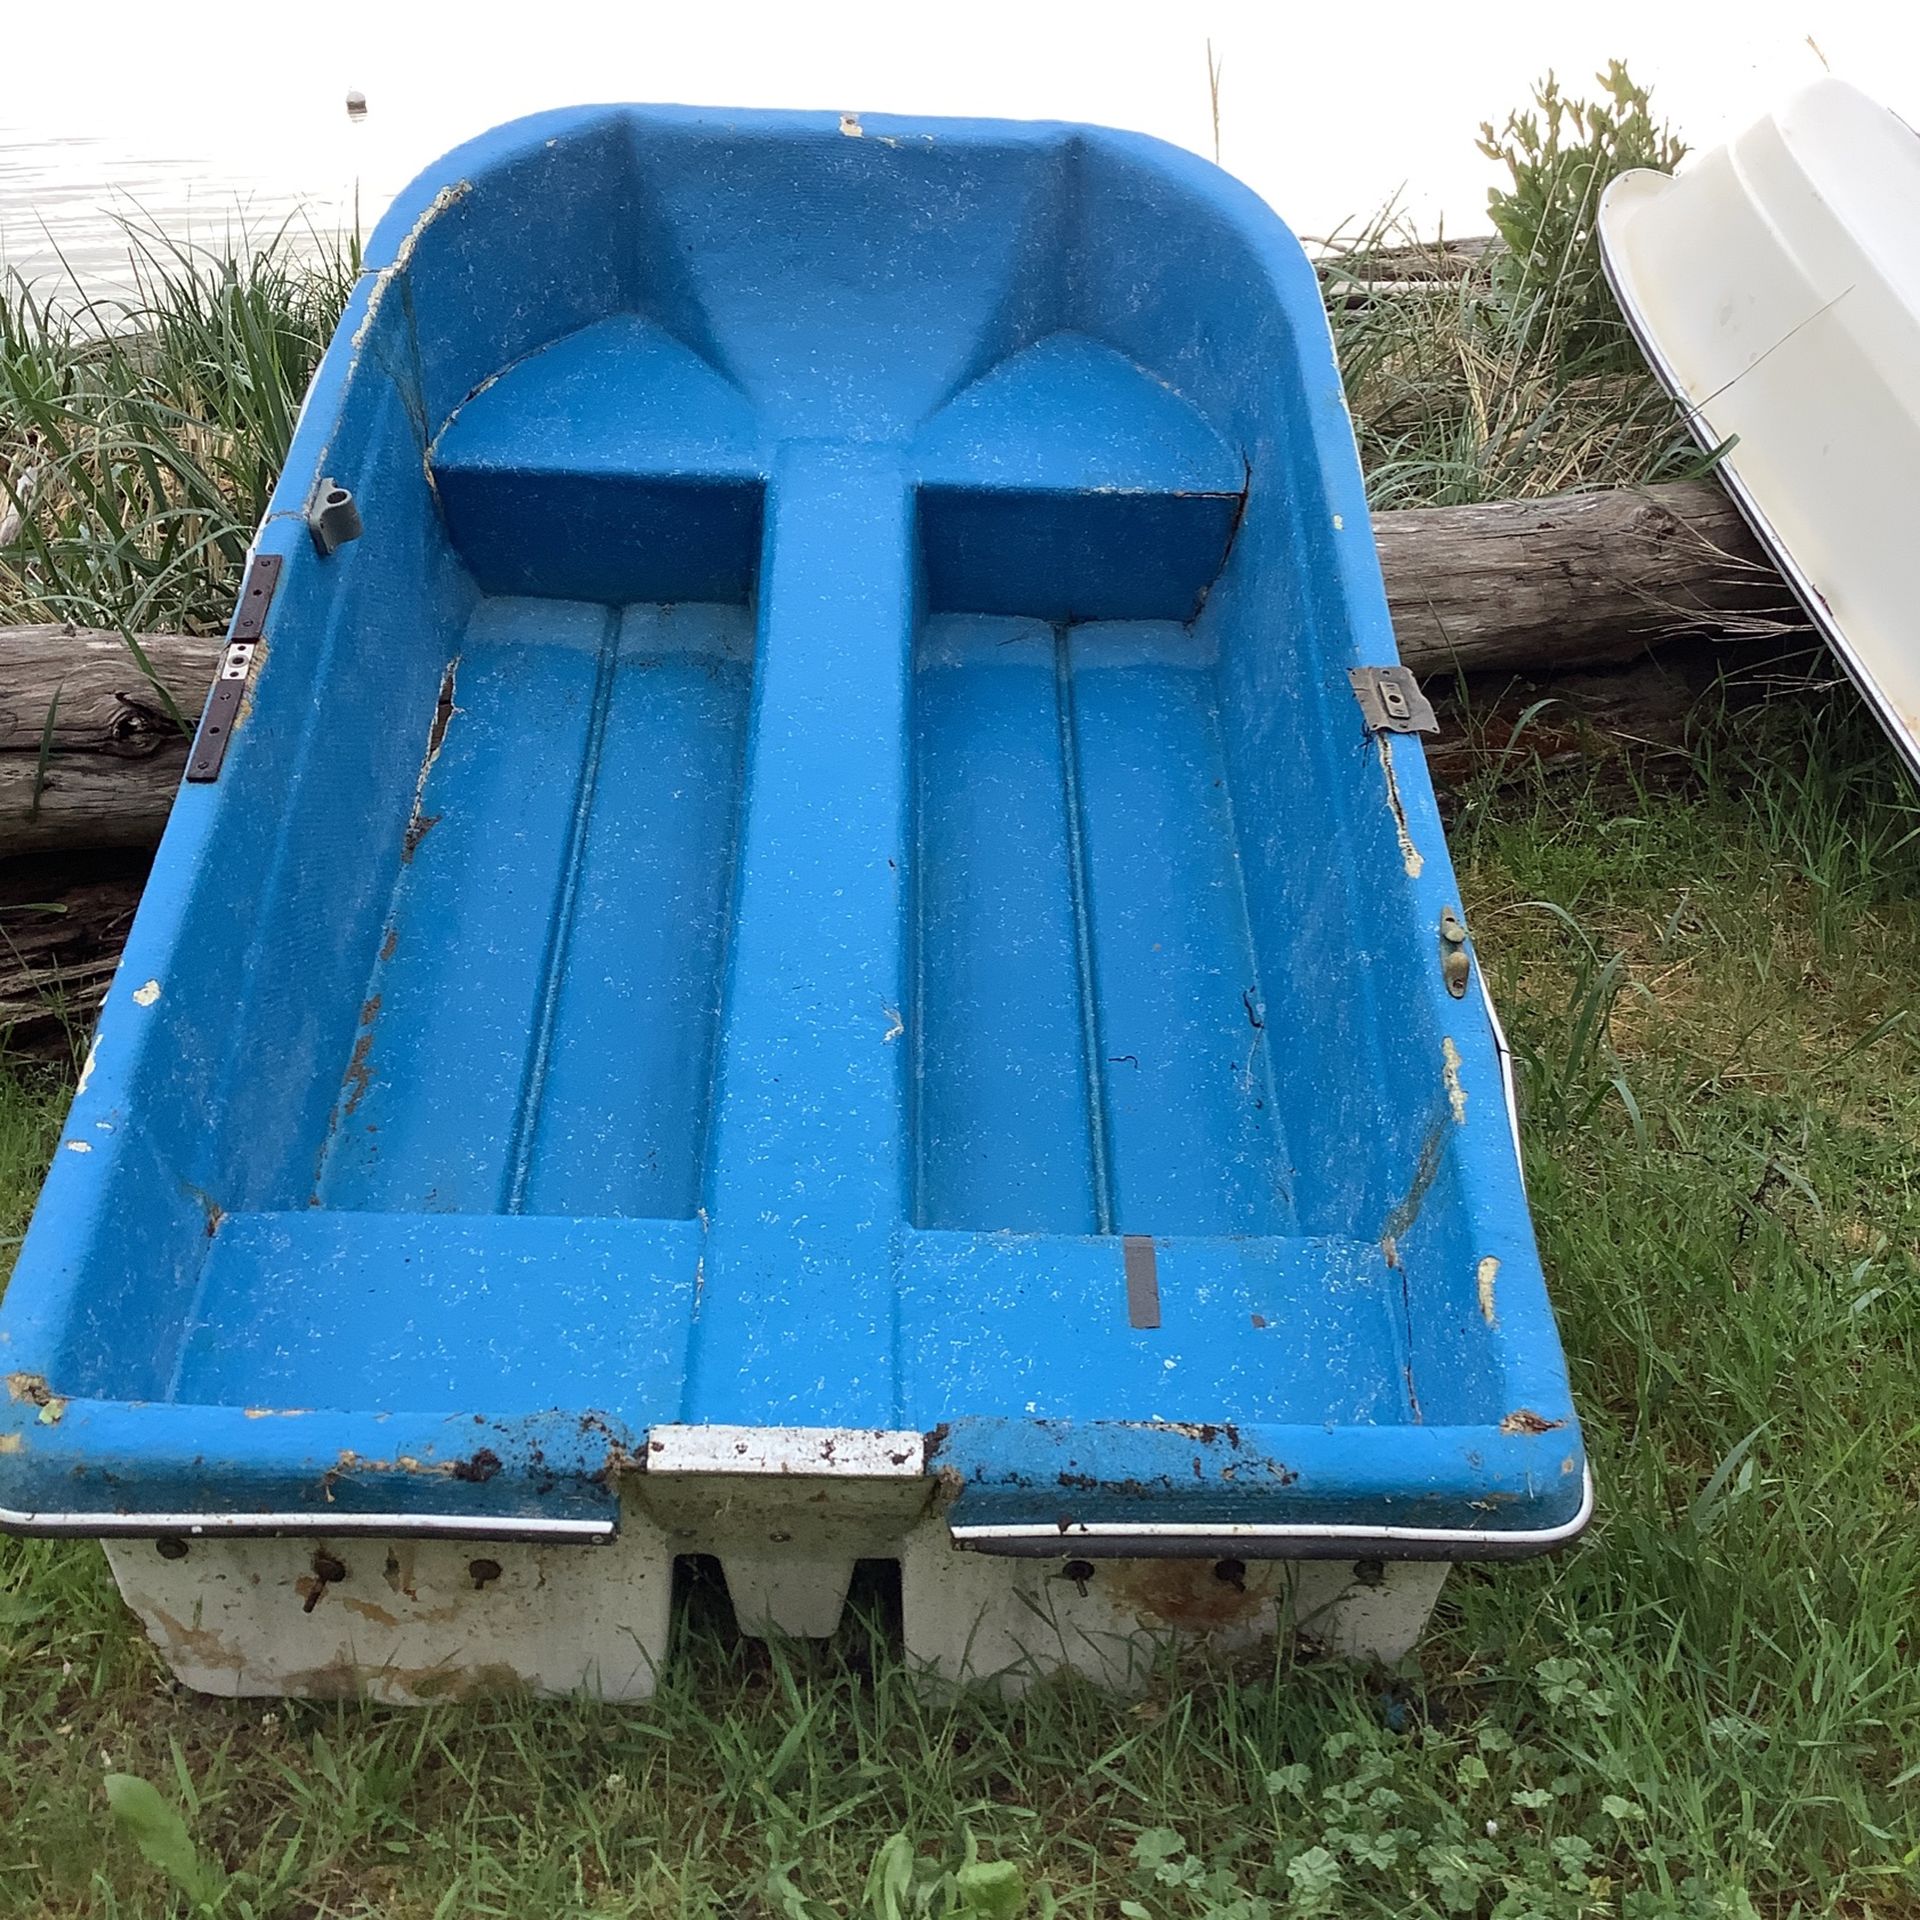 Free 8 Ft Rowboat To Be Used For A Planter Box Or Sandbox.  It Is Not Salvageable For Flotation.  We Can Deliver On CAMANO Island